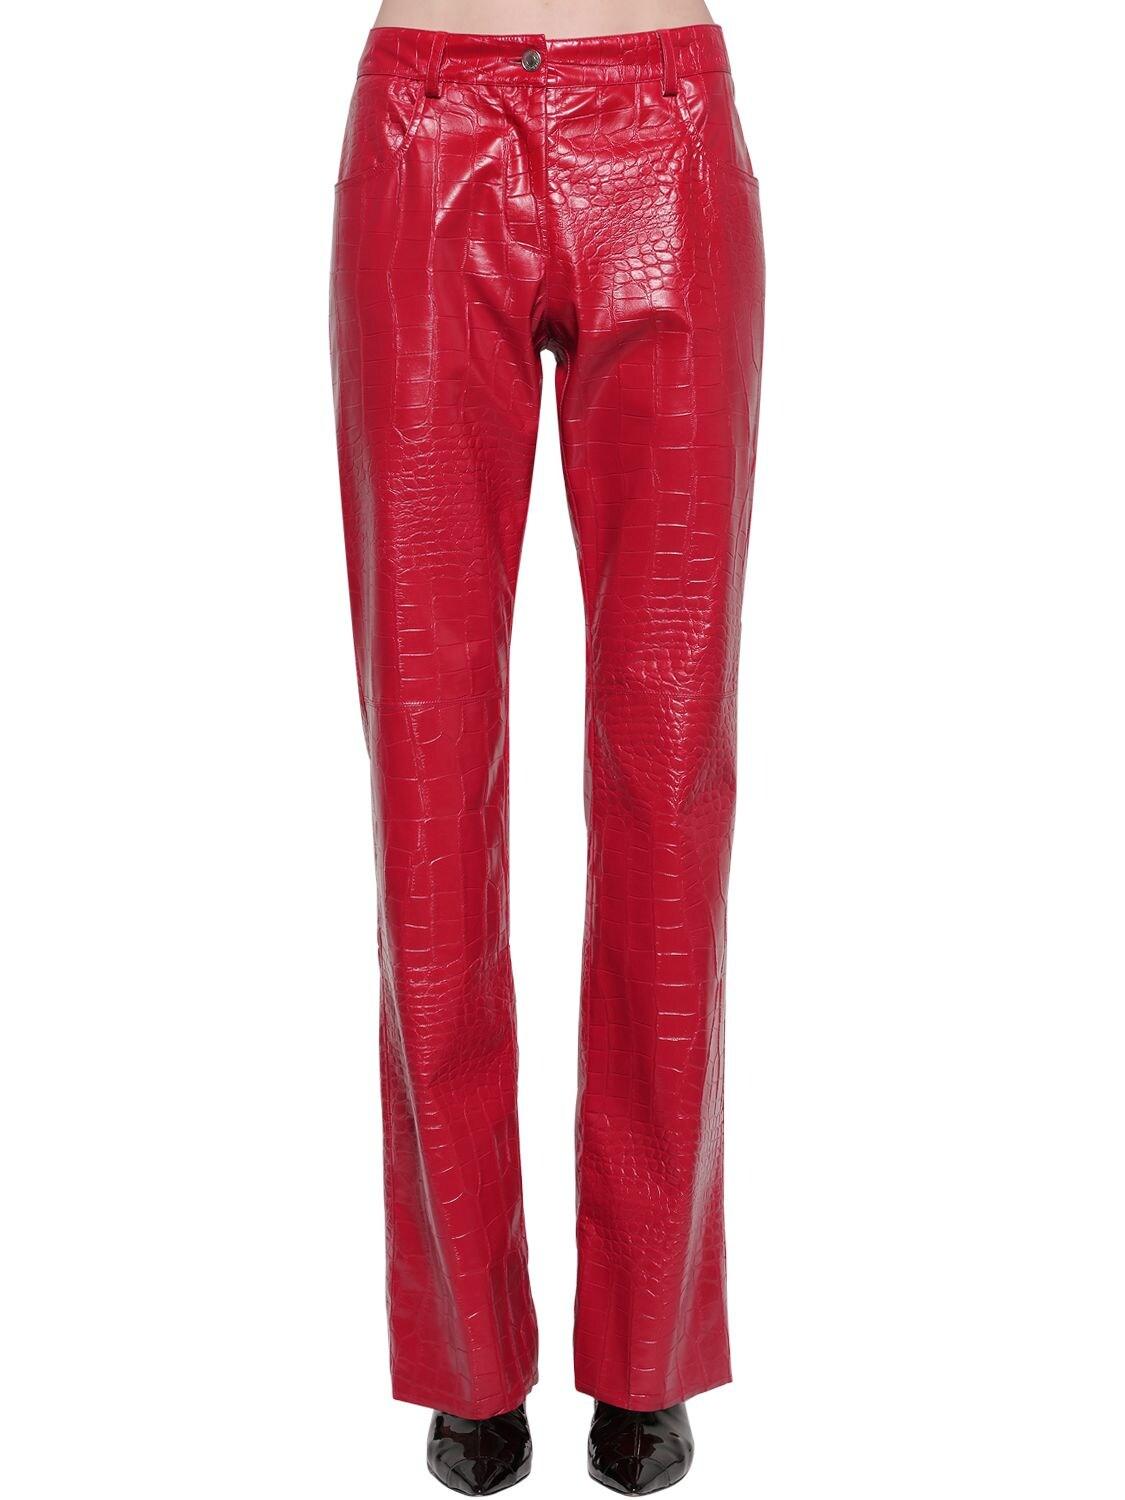 MSGM Croc Embossed Faux Leather Pants in Red | Lyst